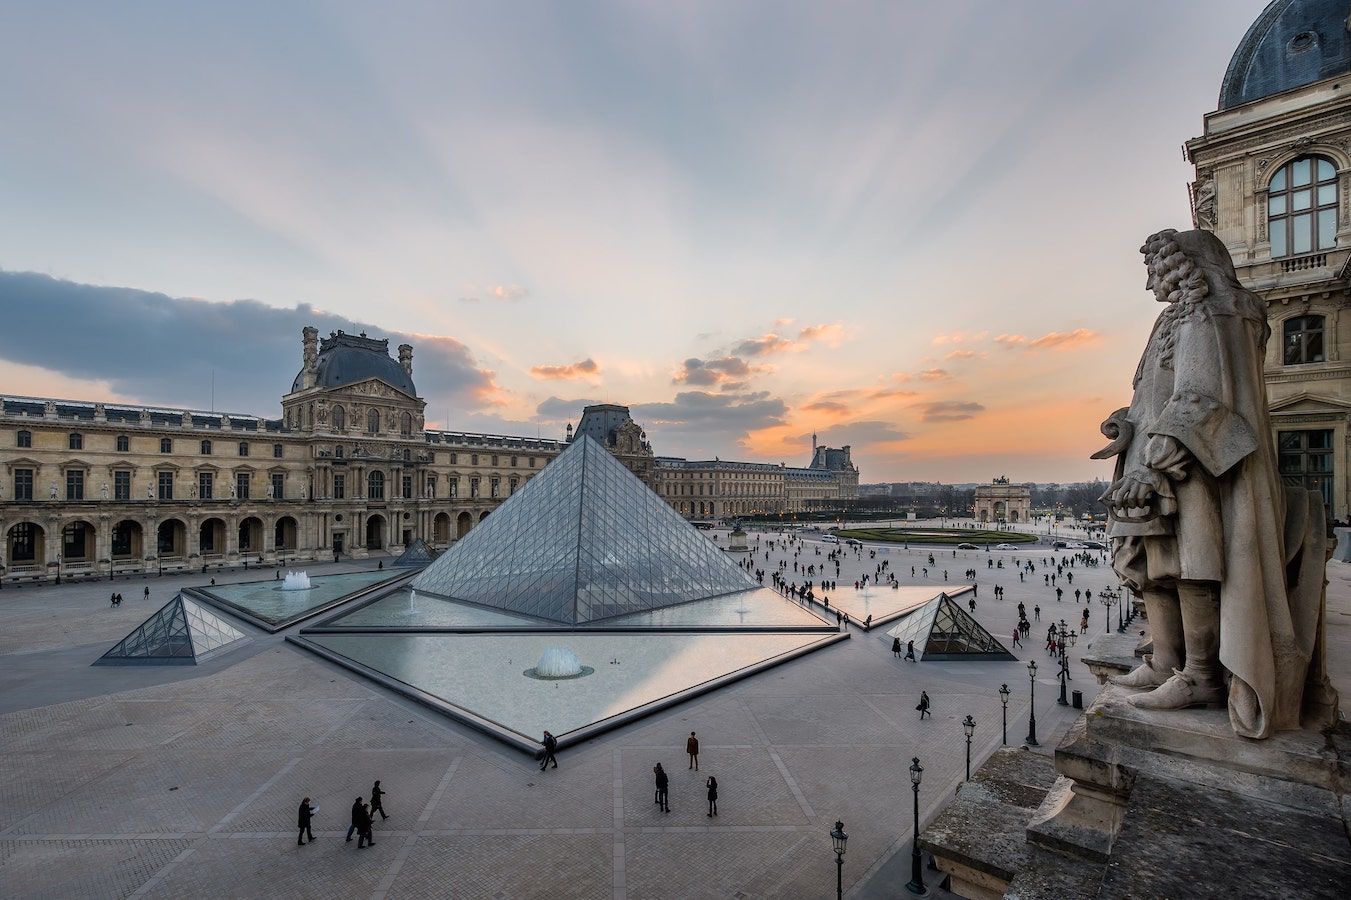 View of the Louvre Museum